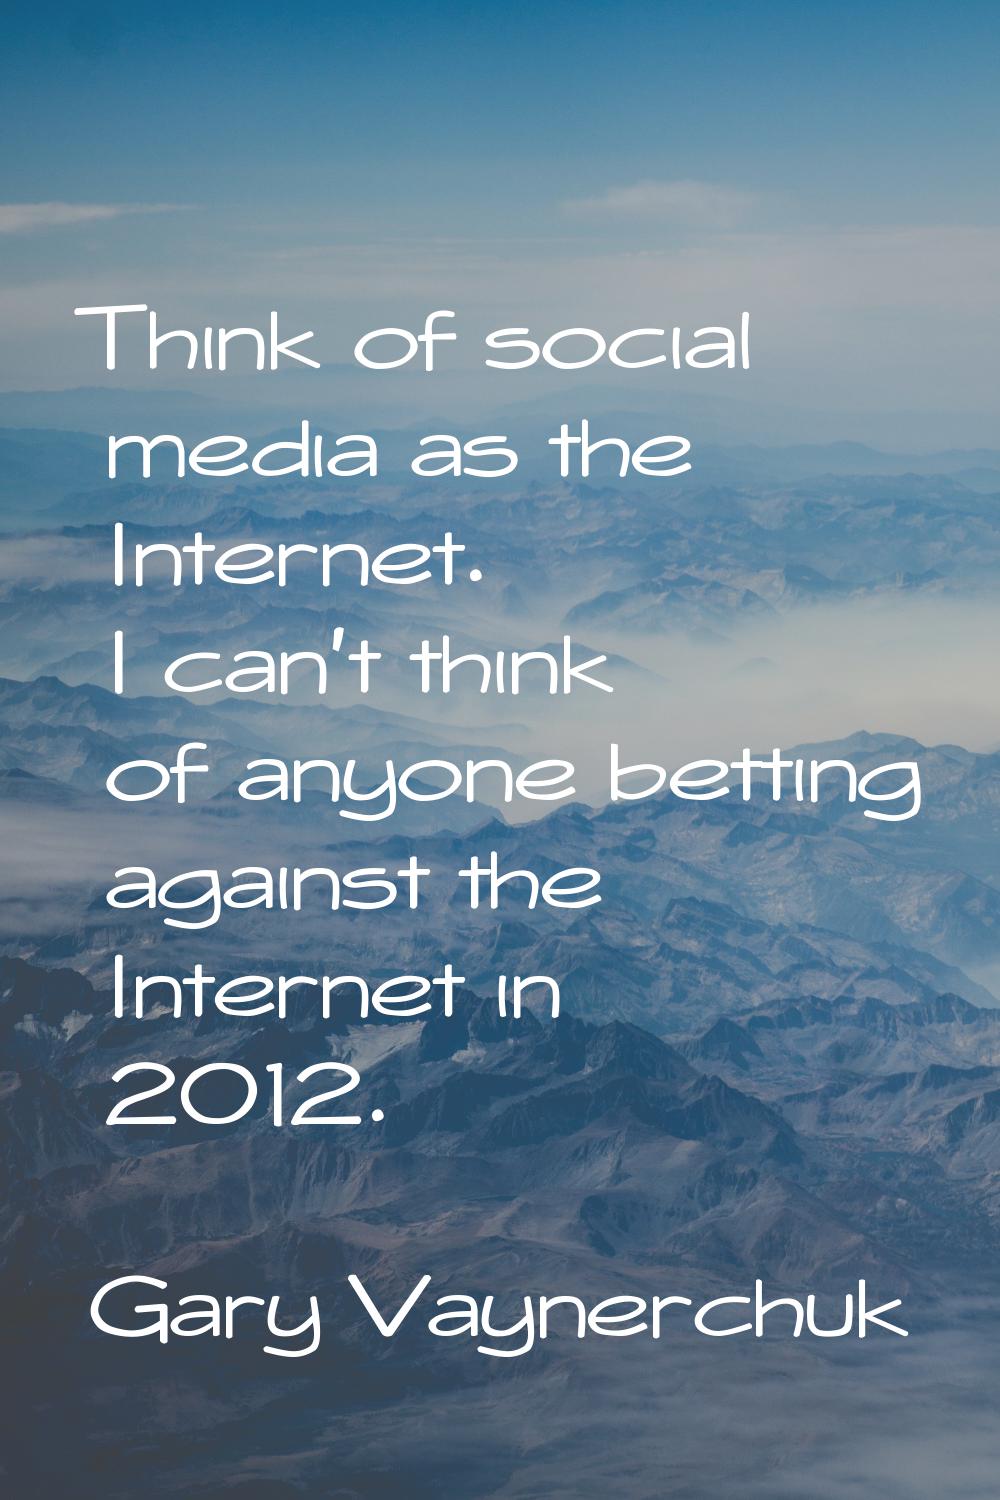 Think of social media as the Internet. I can't think of anyone betting against the Internet in 2012